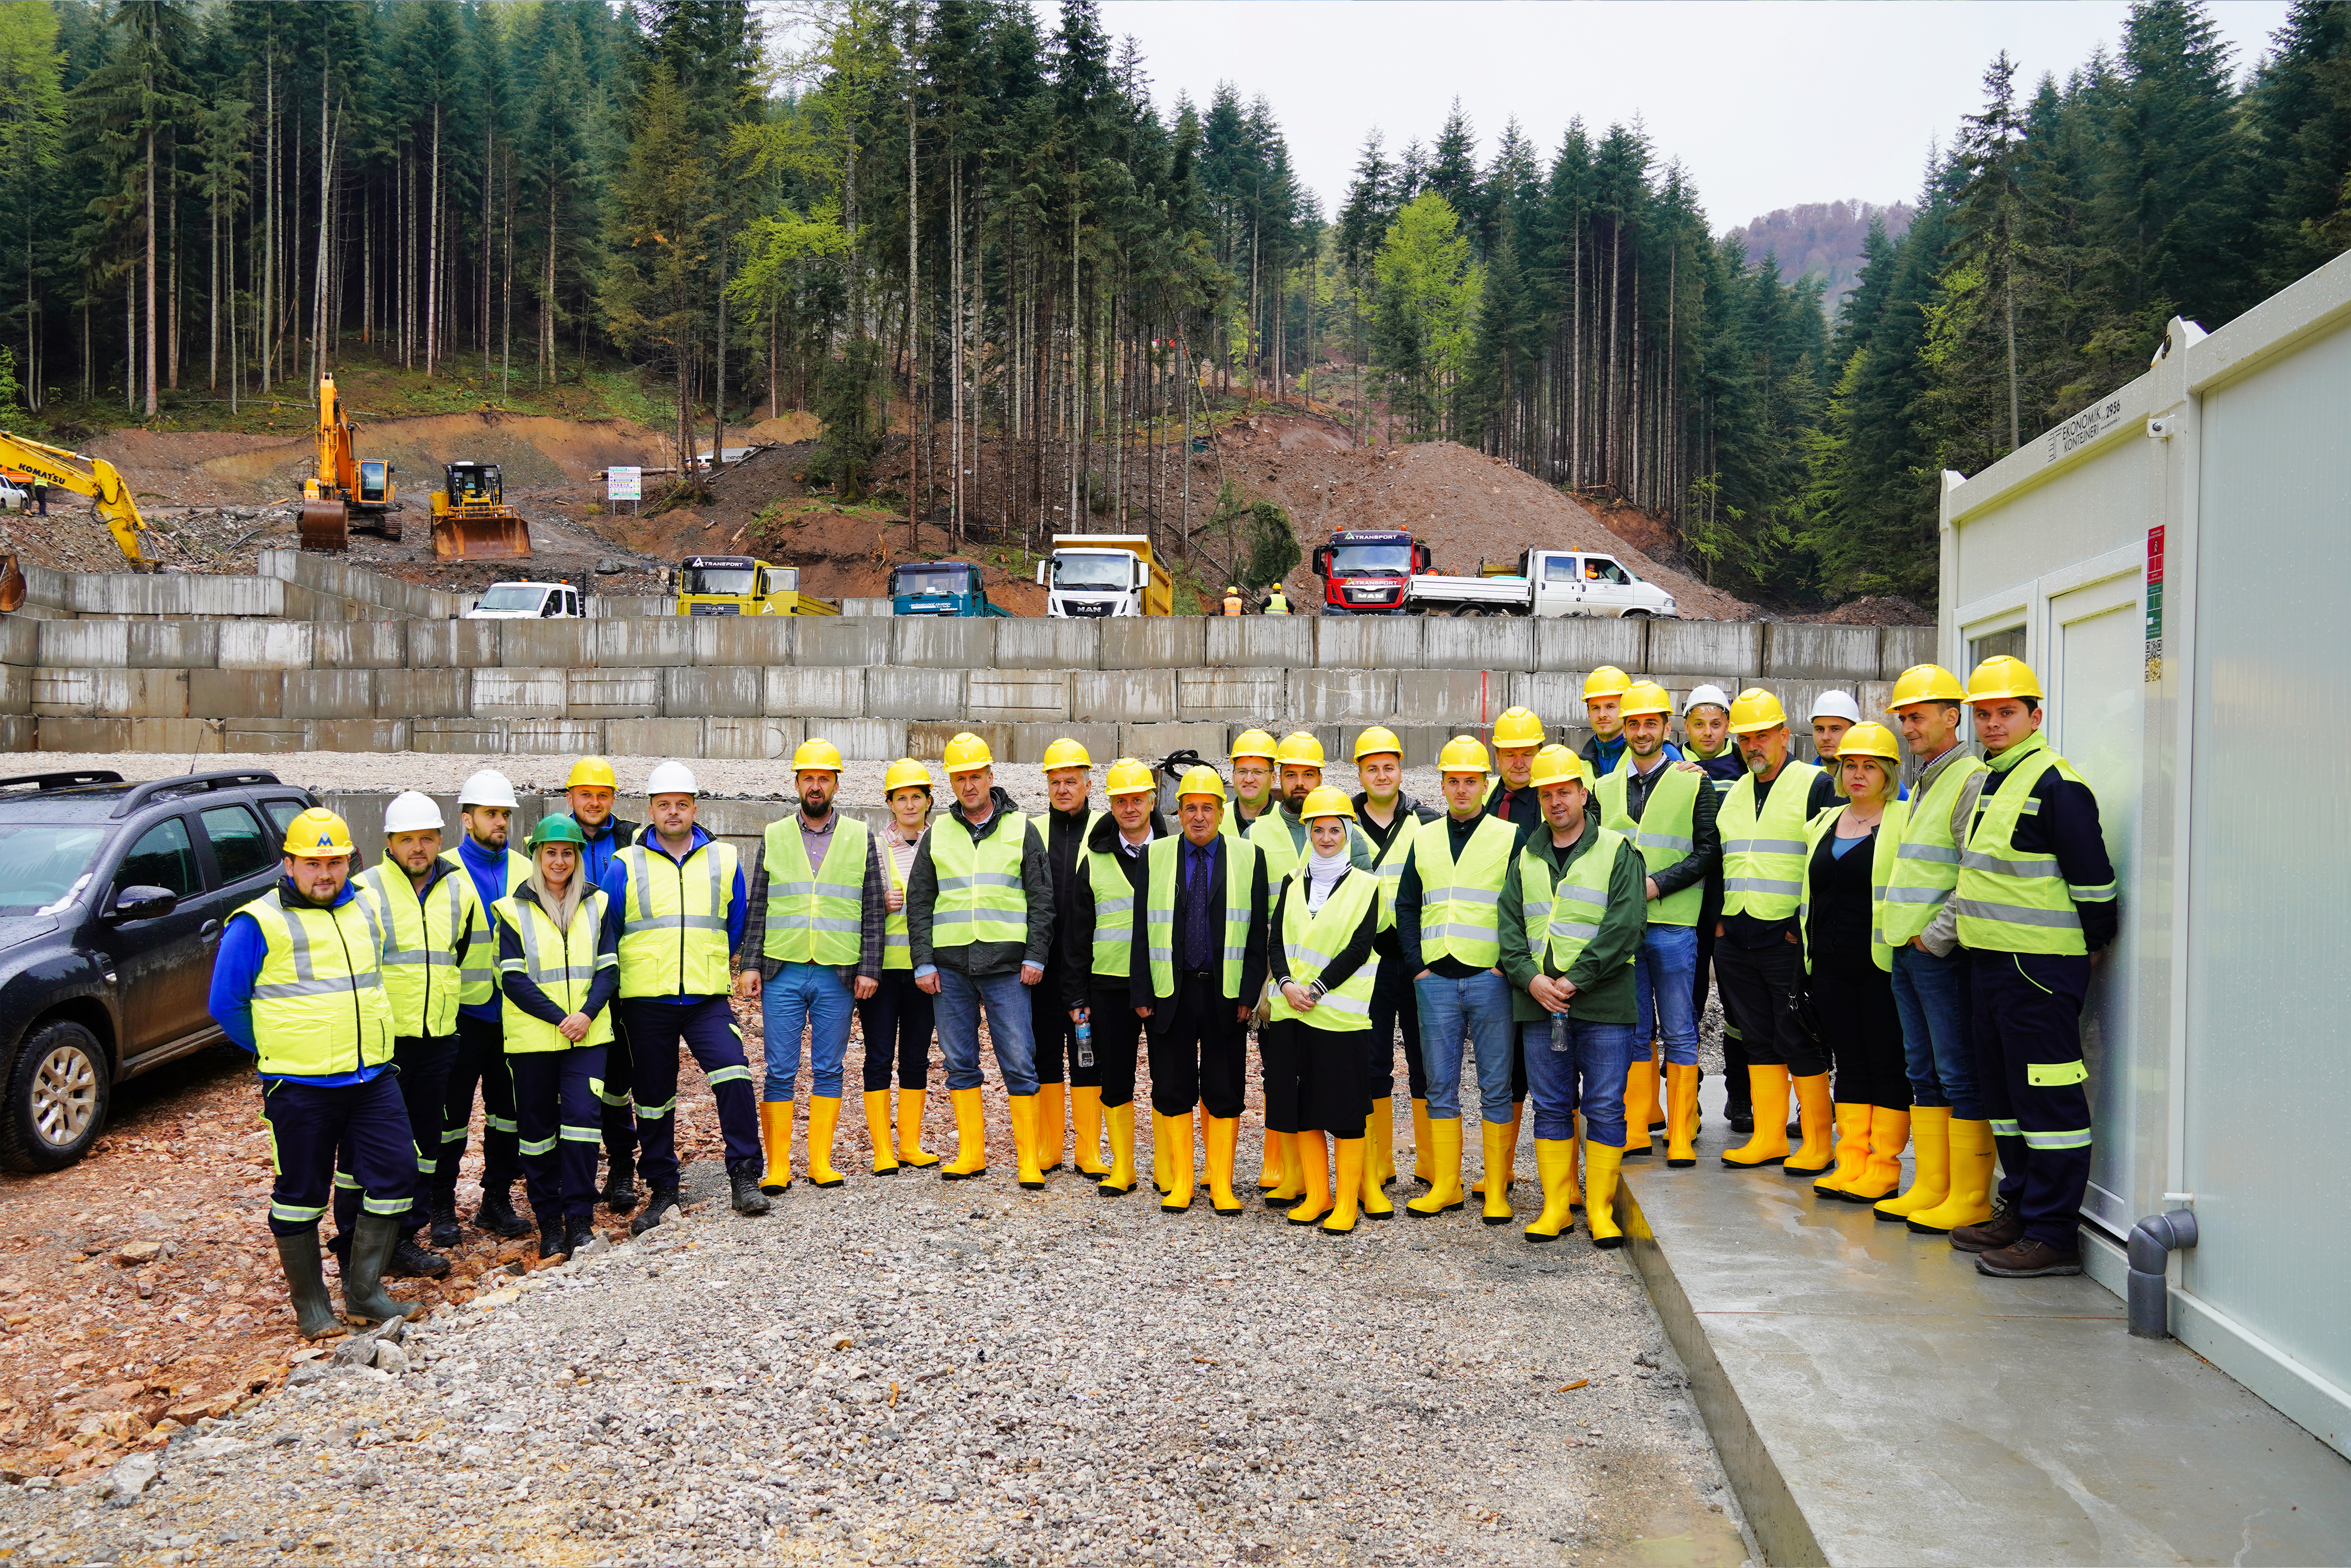 Eastern Mining host councilors from the Municipal Council of Vareš